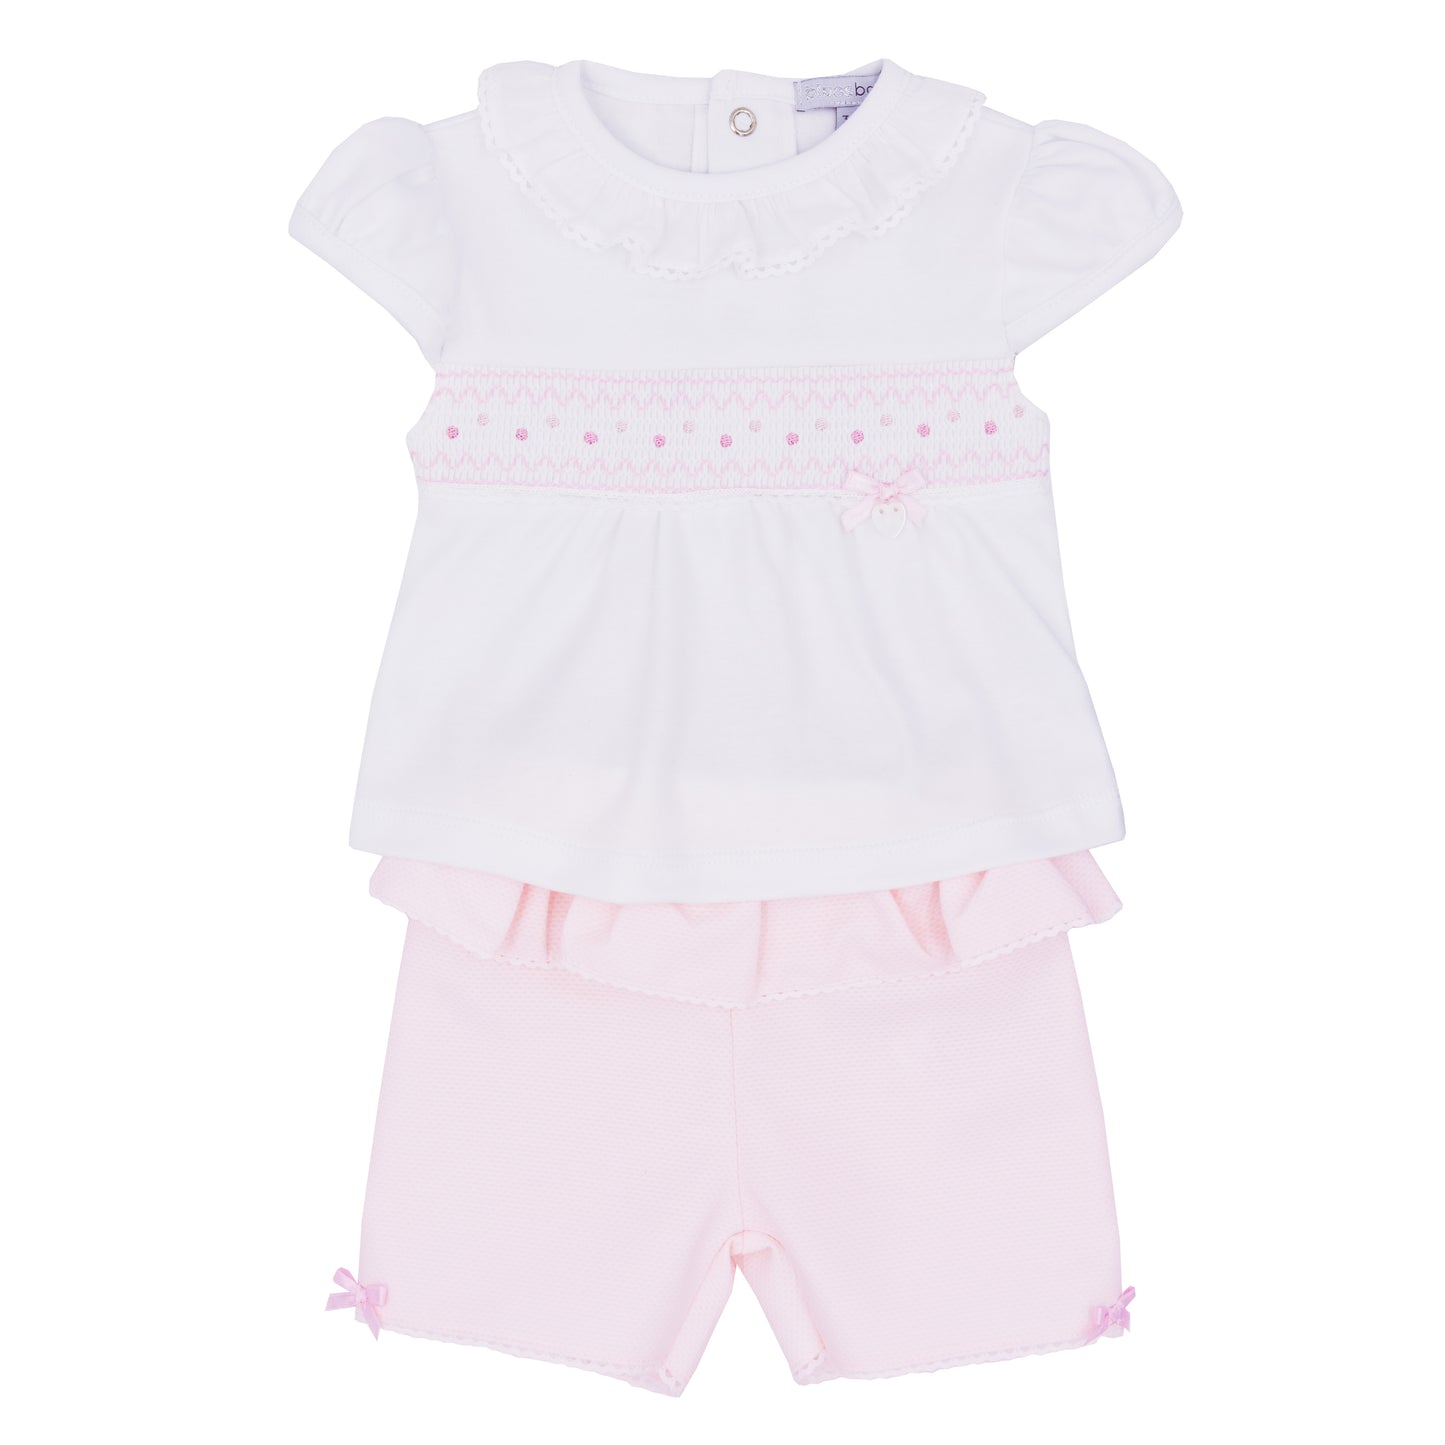 Blues Baby Girls Smocked Top and Shorts with frill